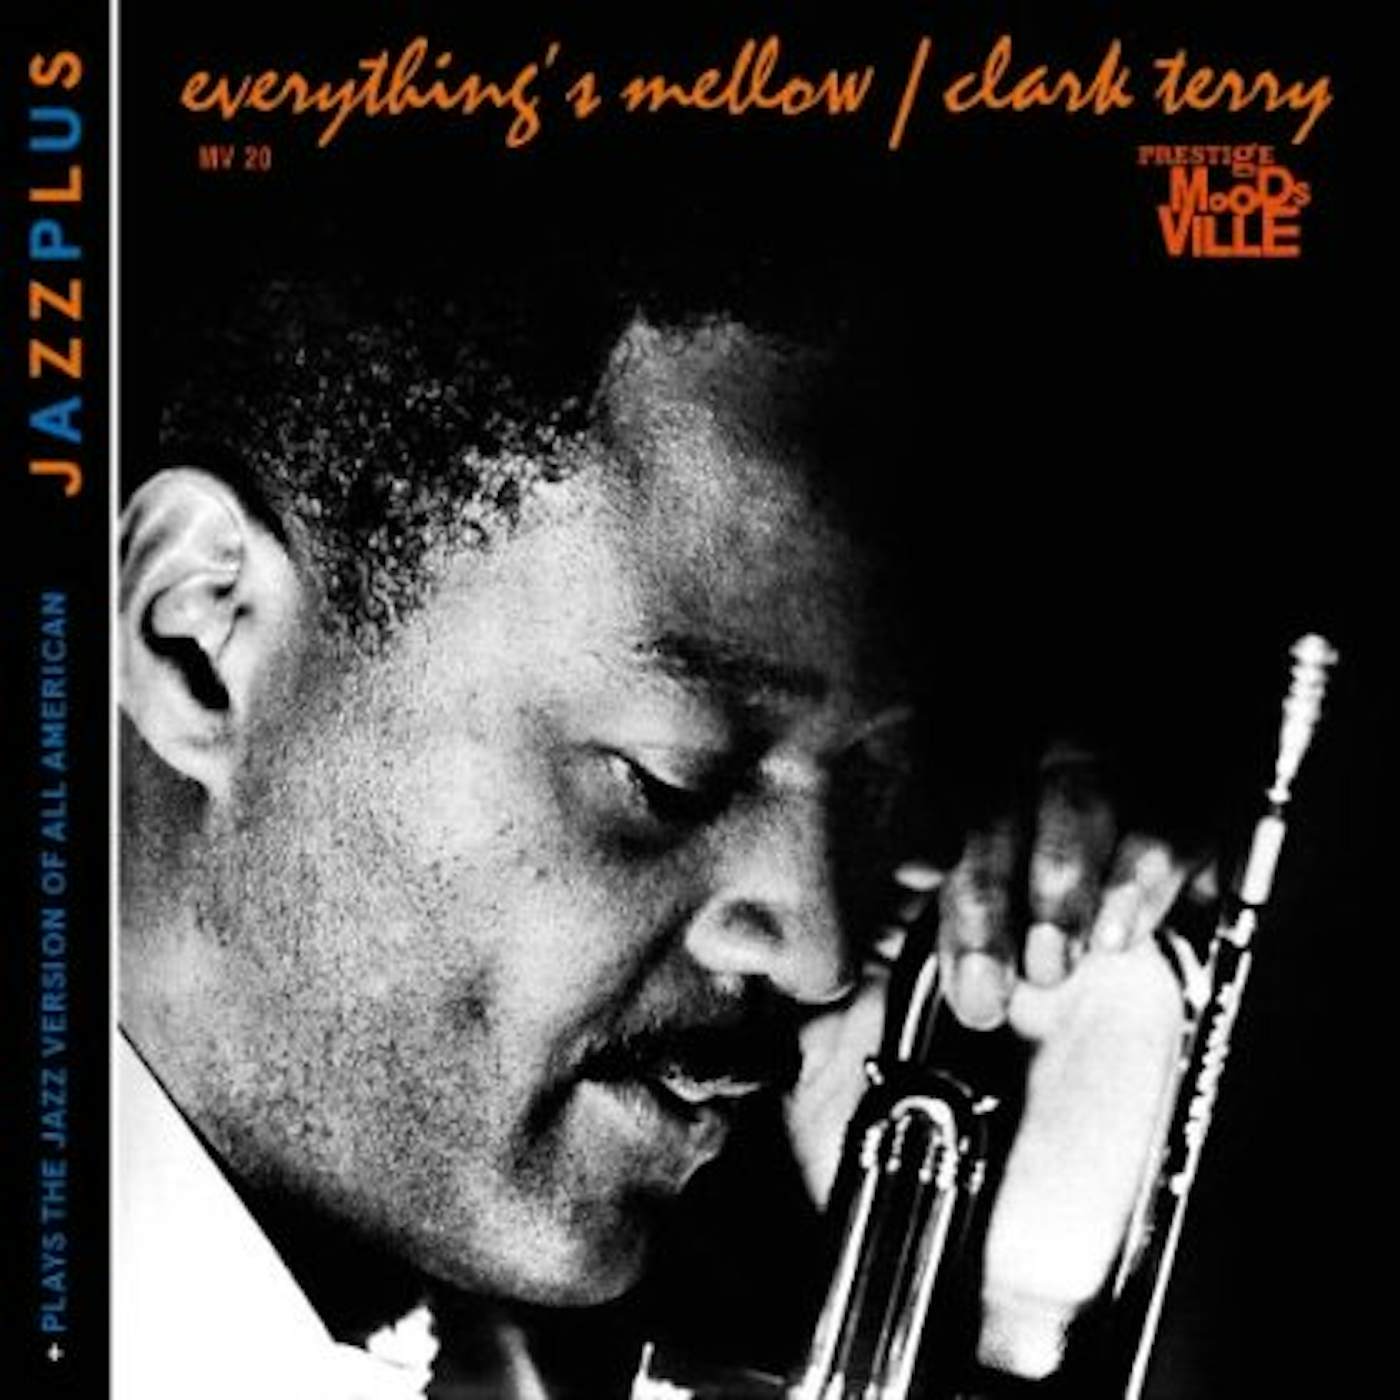 Clark Terry EVERYTHING'S MELLOW + PLAYS THE JAZZ VERSION CD